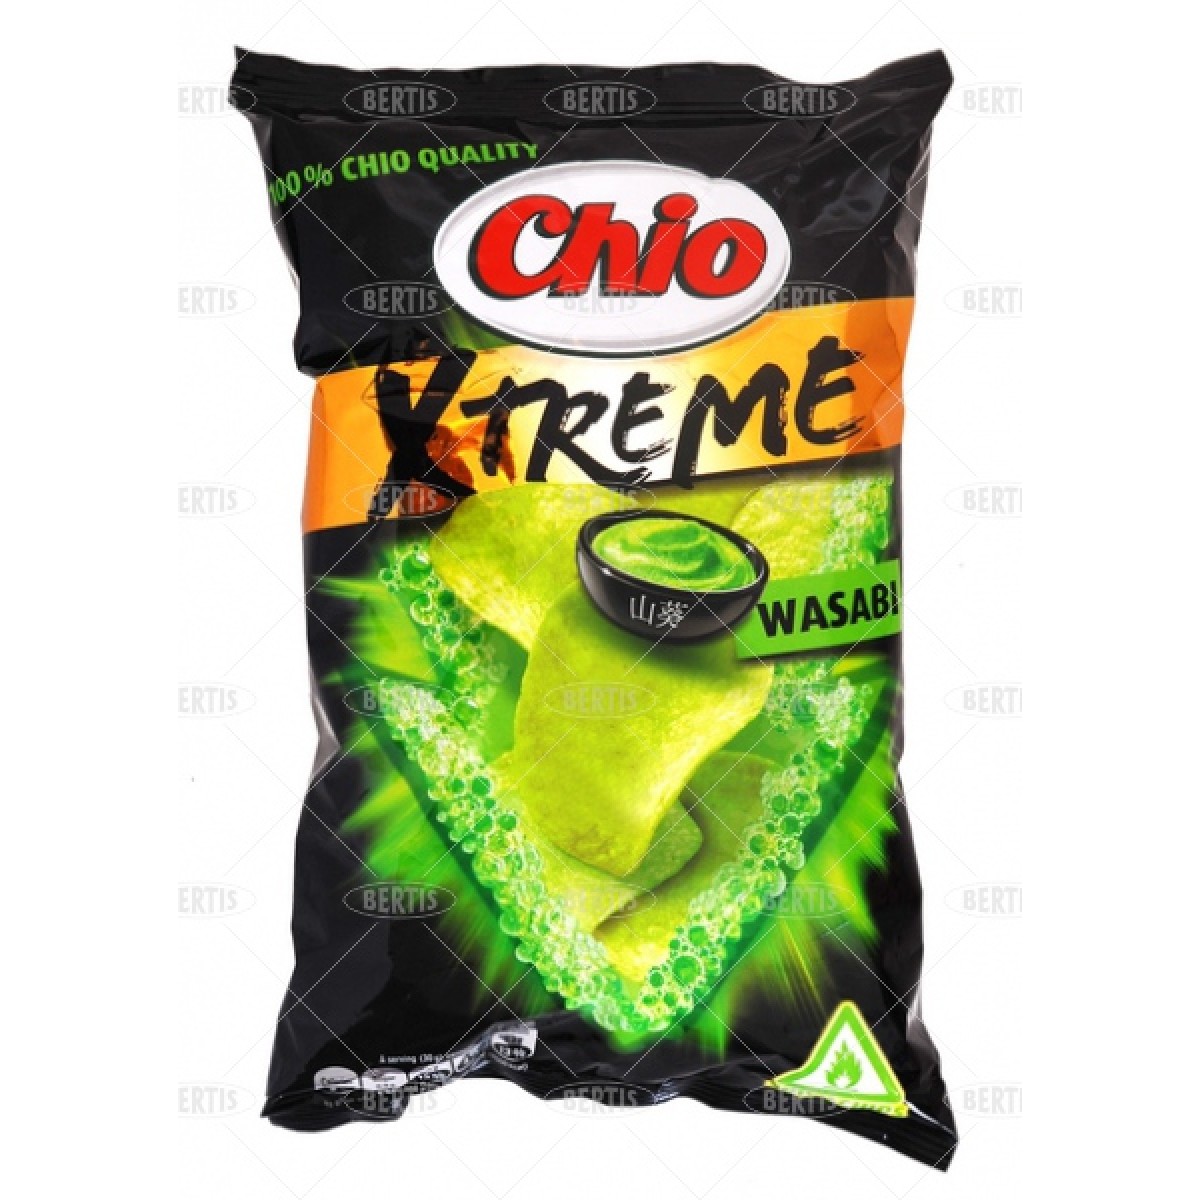 Chips Xtreme Wasabi Chio Chips